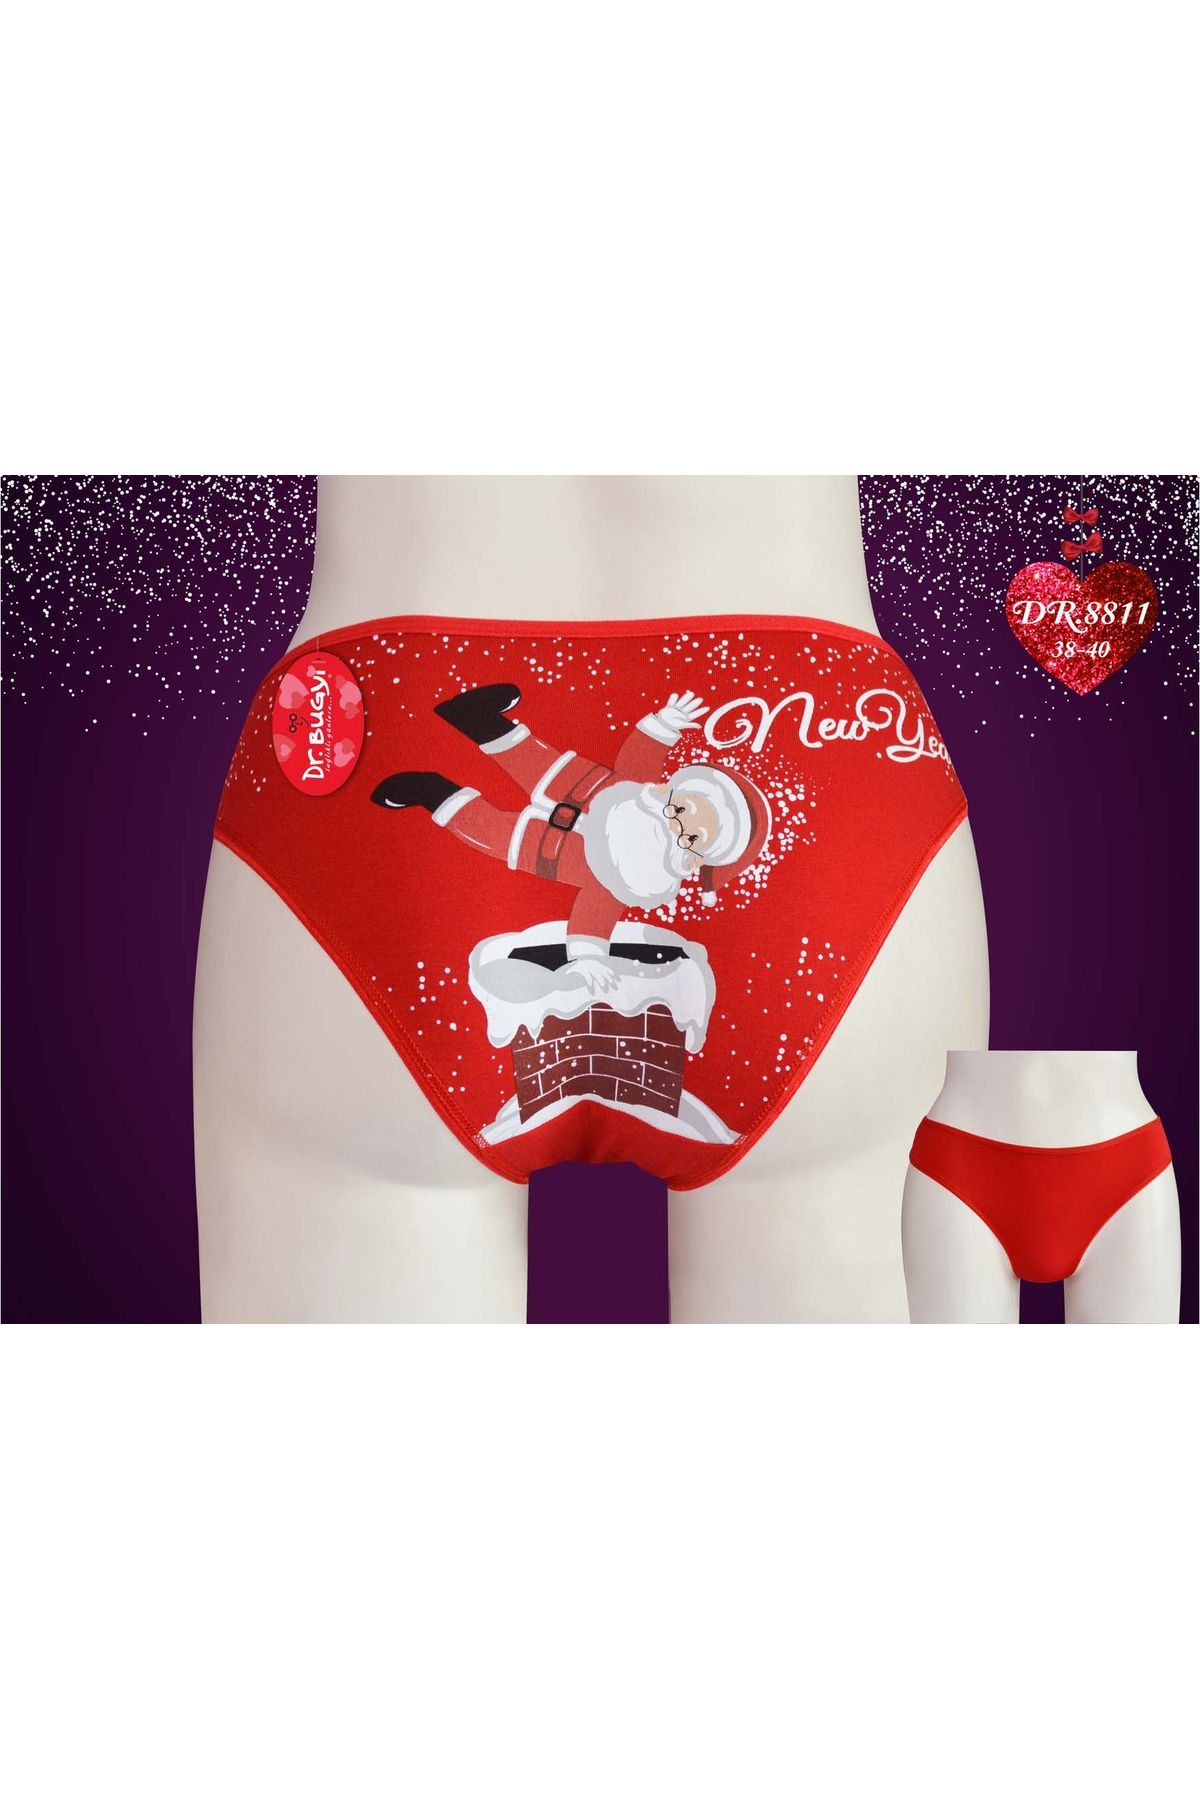 Papatya DR.BUGGY 8812 WOMEN'S CHRISTMAS NEW YEAR BACK PRINTED RED PANTIES  (38-40) STANDARD SIZE - Trendyol